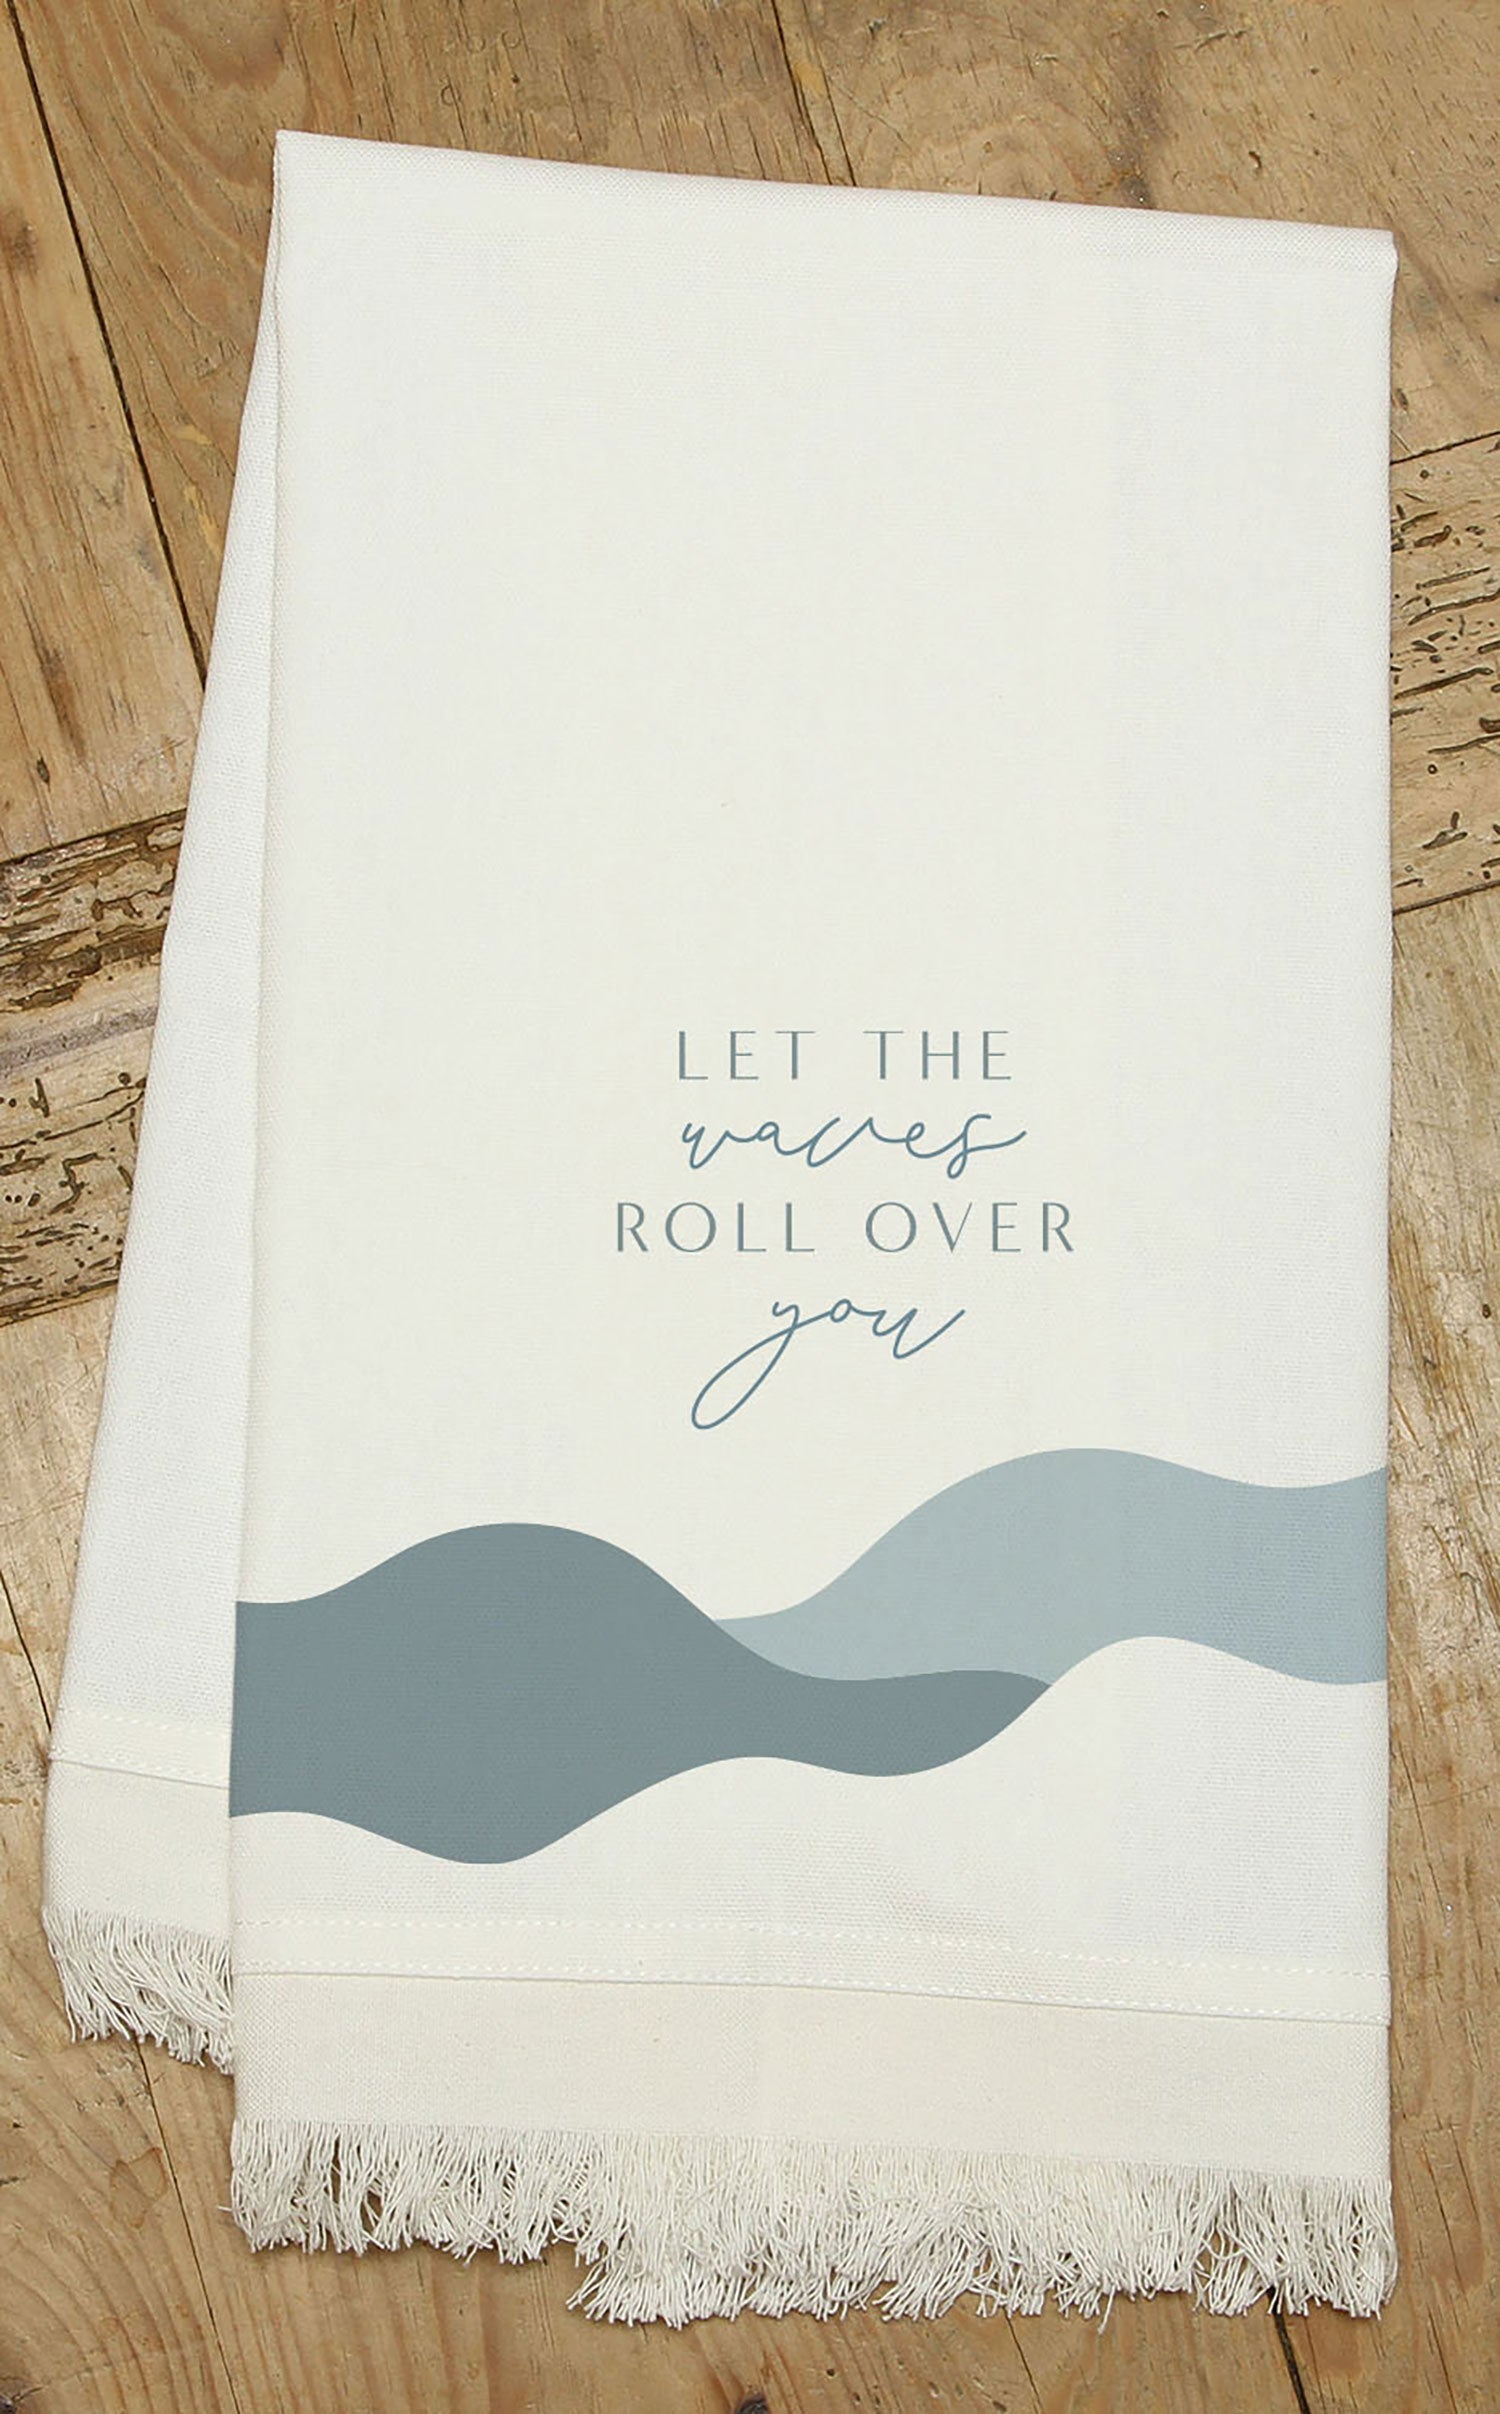 Let the waves roll over you / (MS Natural) Kitchen Tea Towel